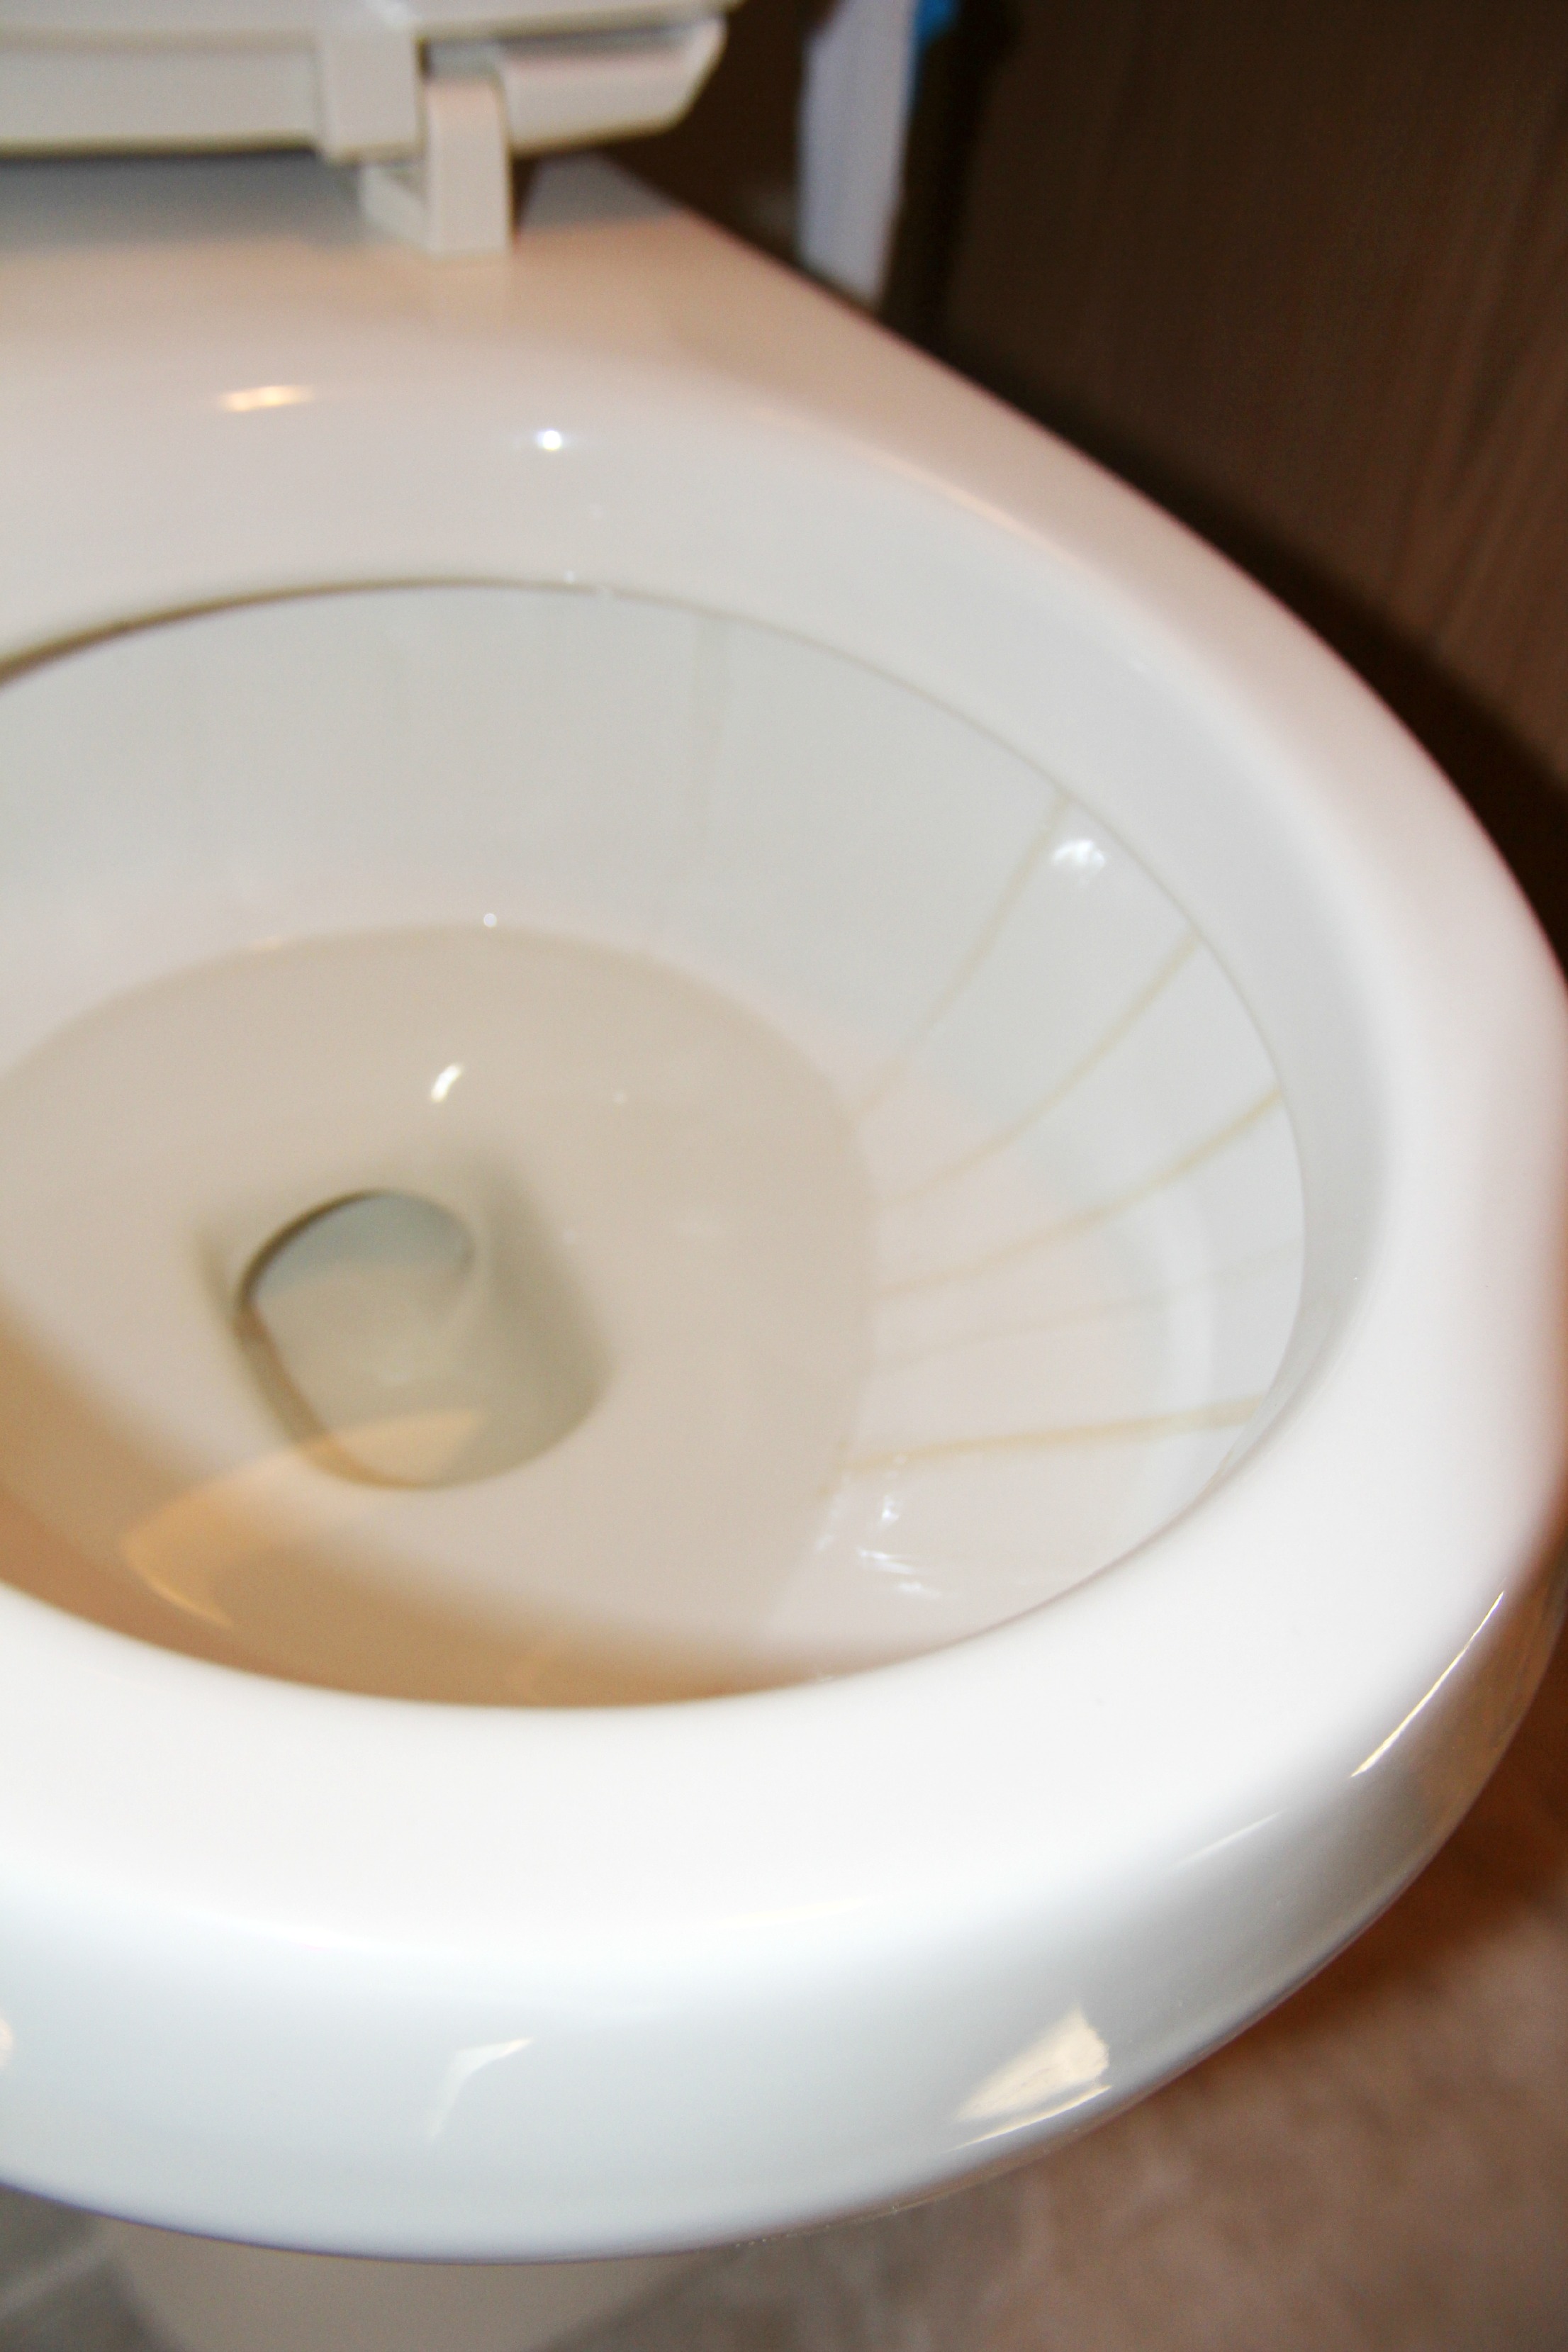 How to Remove Hard Water Stains From Your Toilet